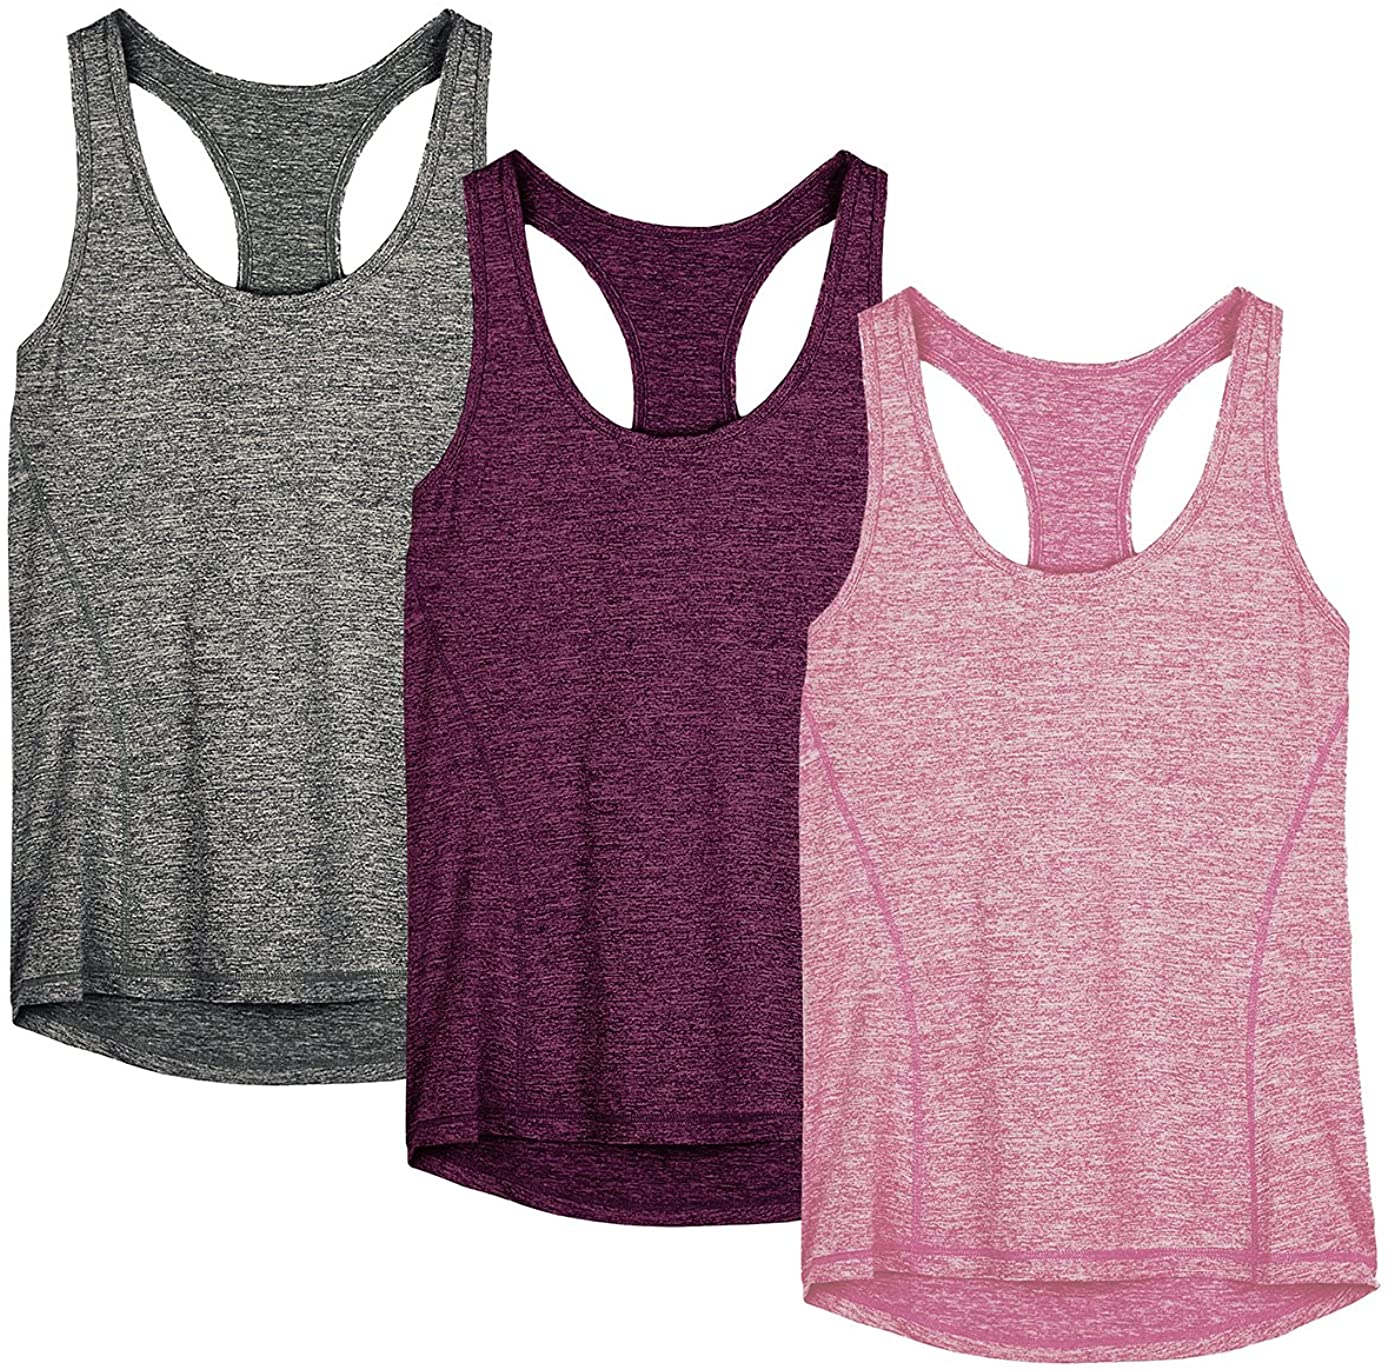 Icyzone Tag-Free Racerback Women's Workout Tank Tops, 3-Pack